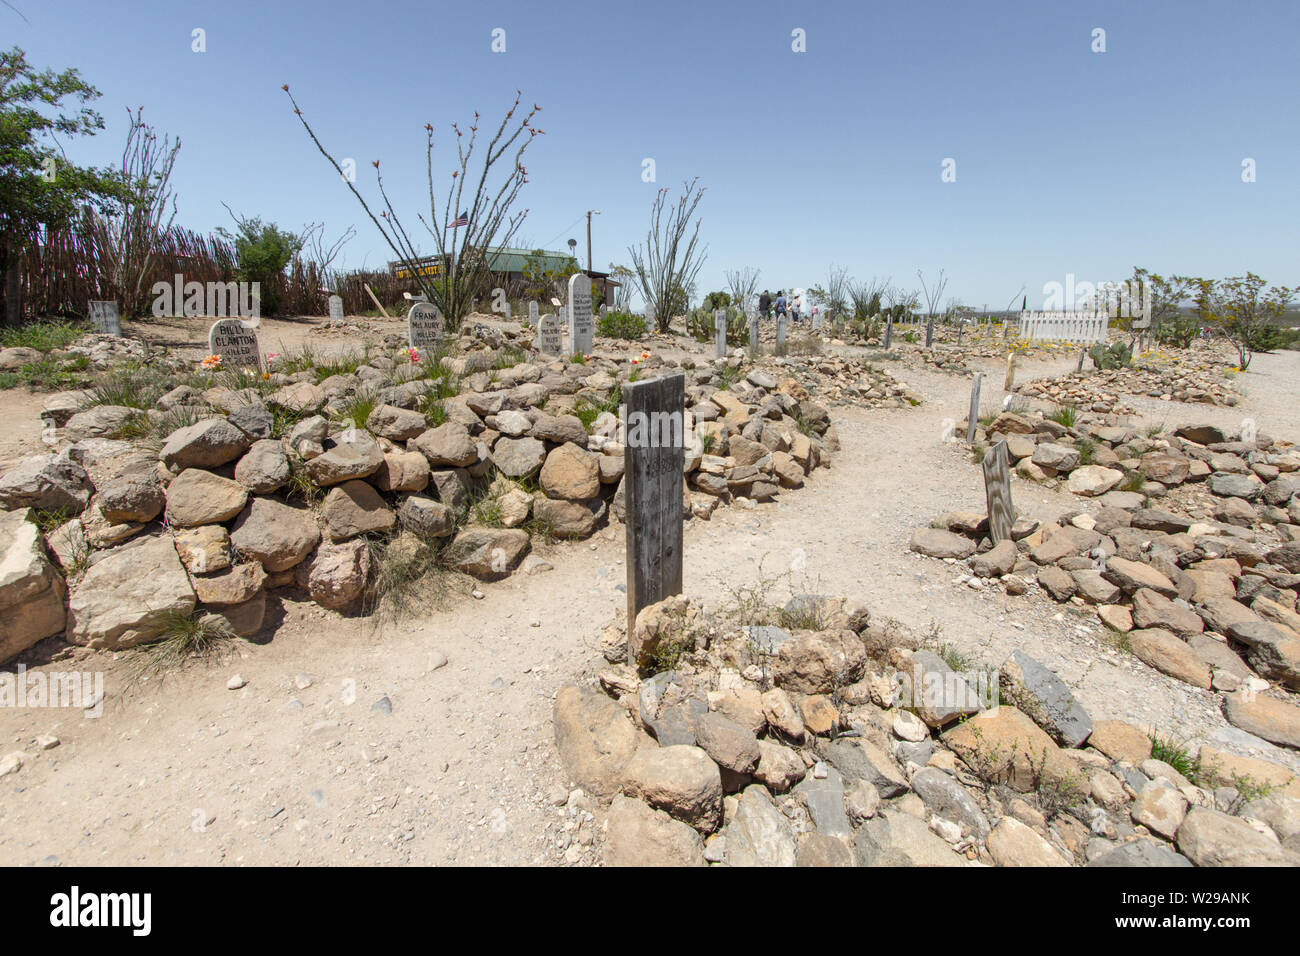 Tombstone, Arizona, USA - May 1, 2019: Graves and markers at the famous Boothill Graveyard in Tombstone Arizona Stock Photo